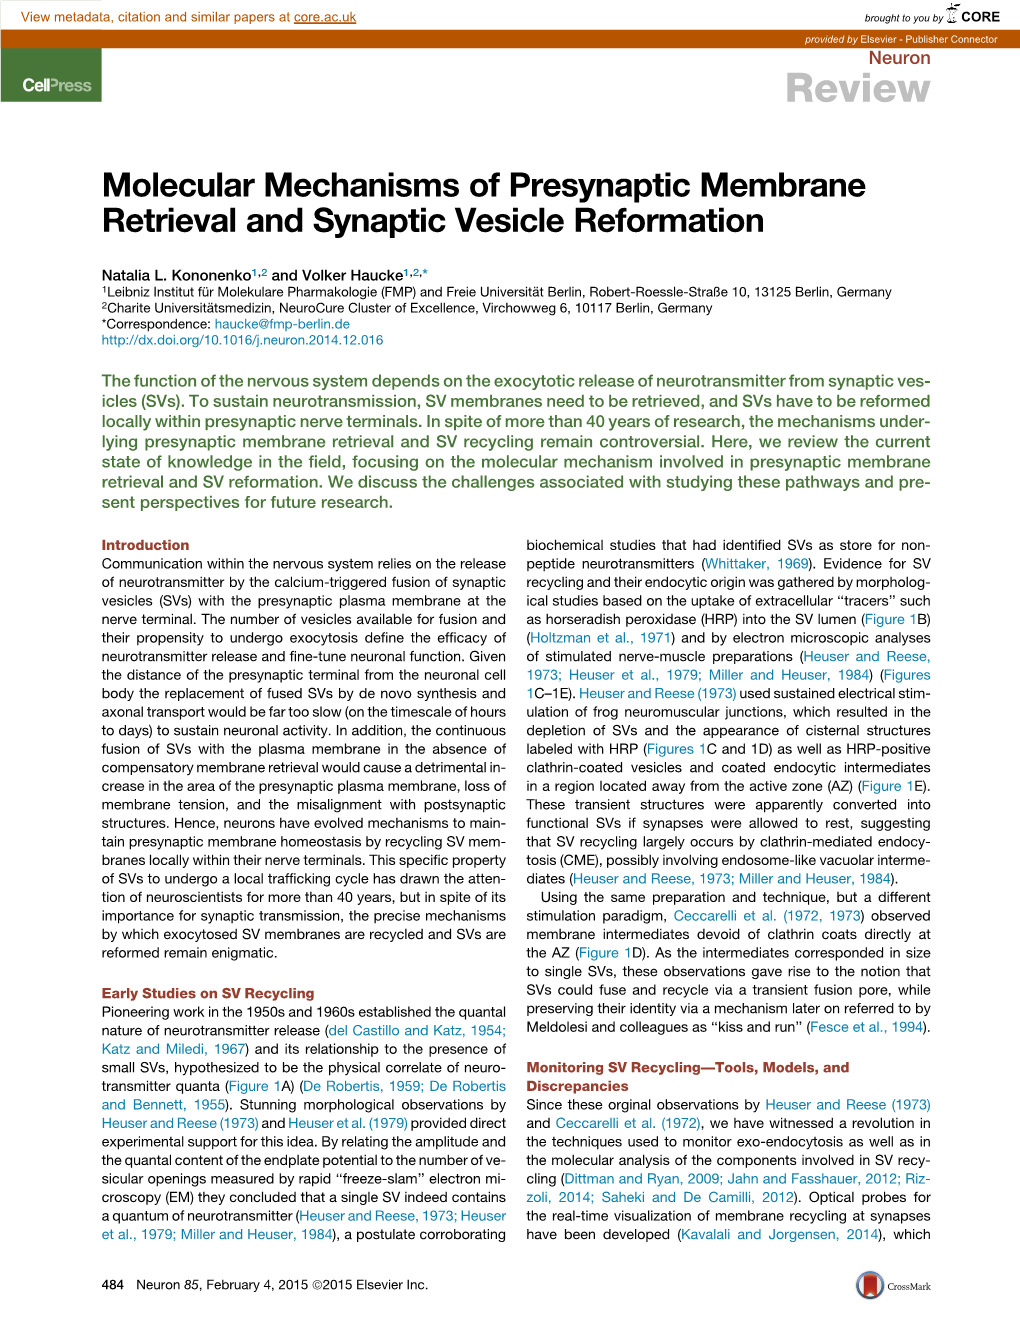 Molecular Mechanisms of Presynaptic Membrane Retrieval and Synaptic Vesicle Reformation